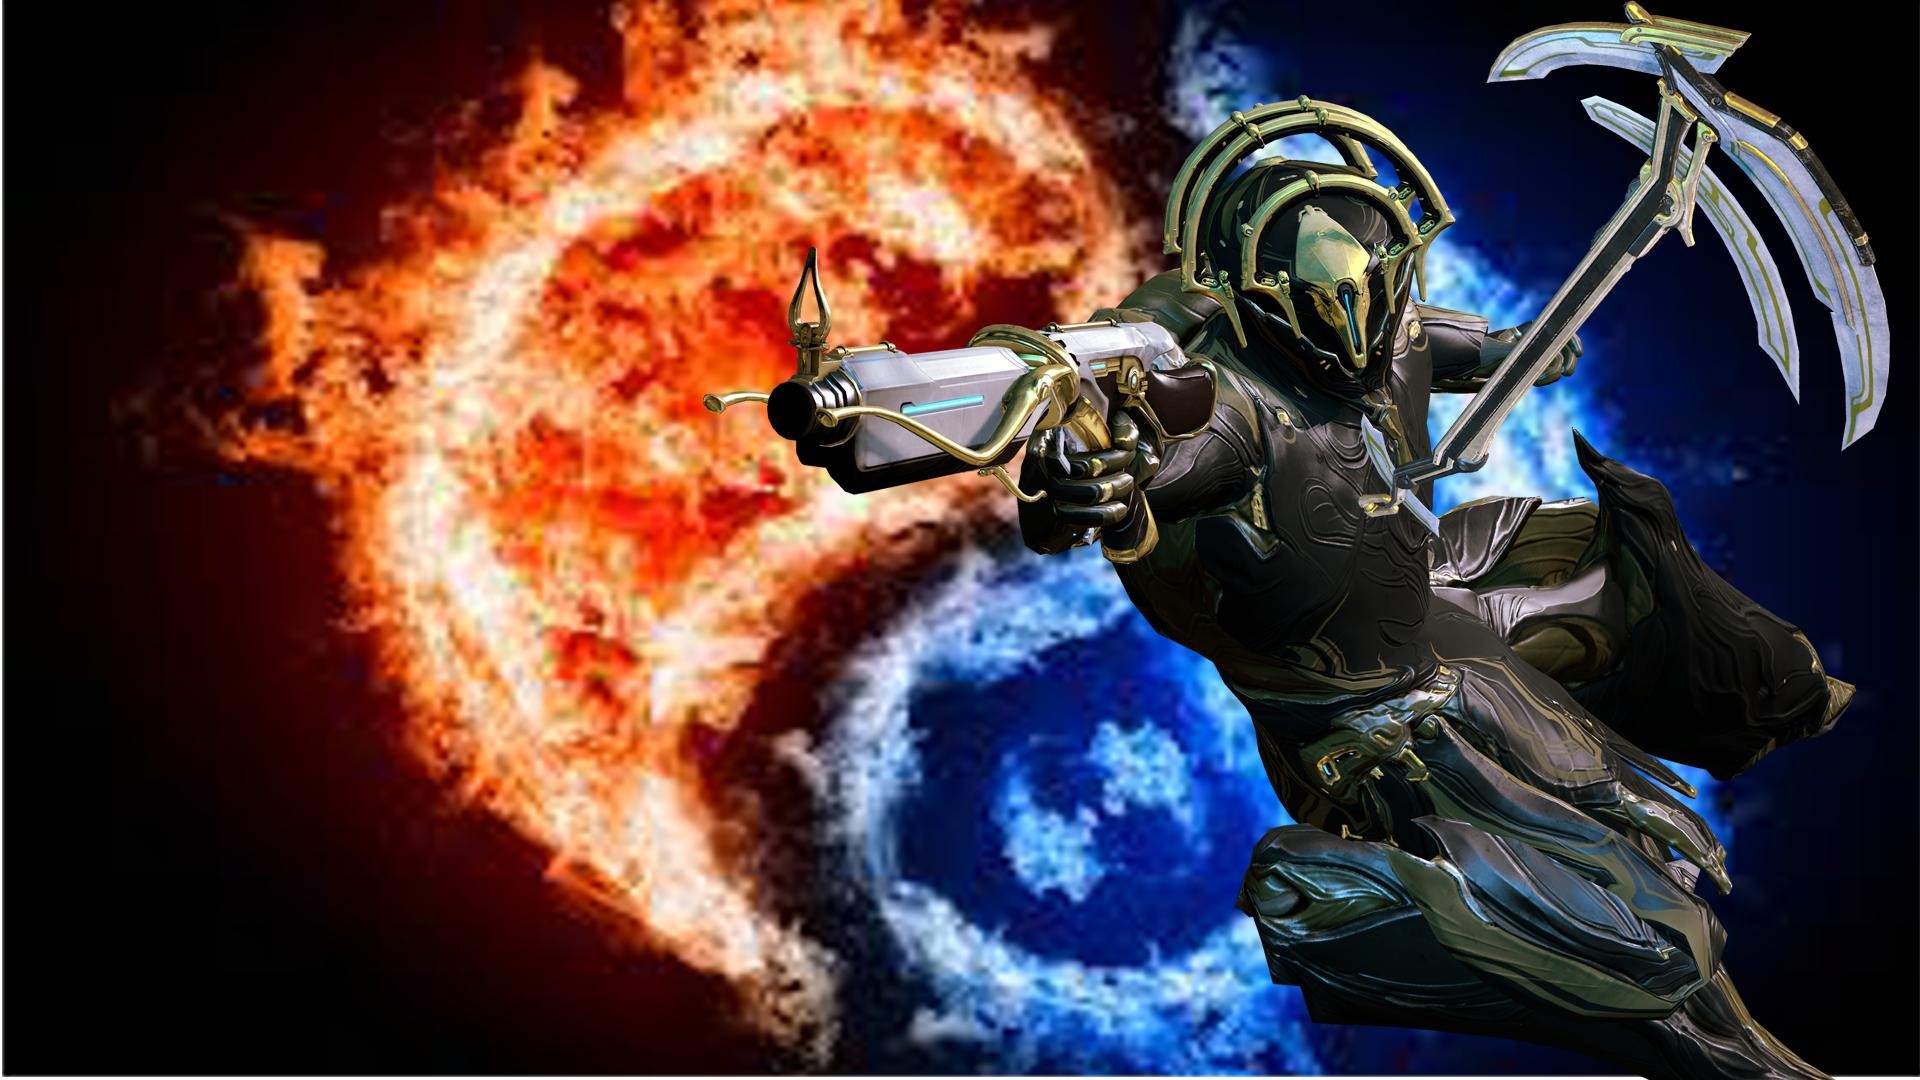 This is a wallpaper of frost prime i just made because i was bored. If you like it and want me to make one for you just post frame background if you